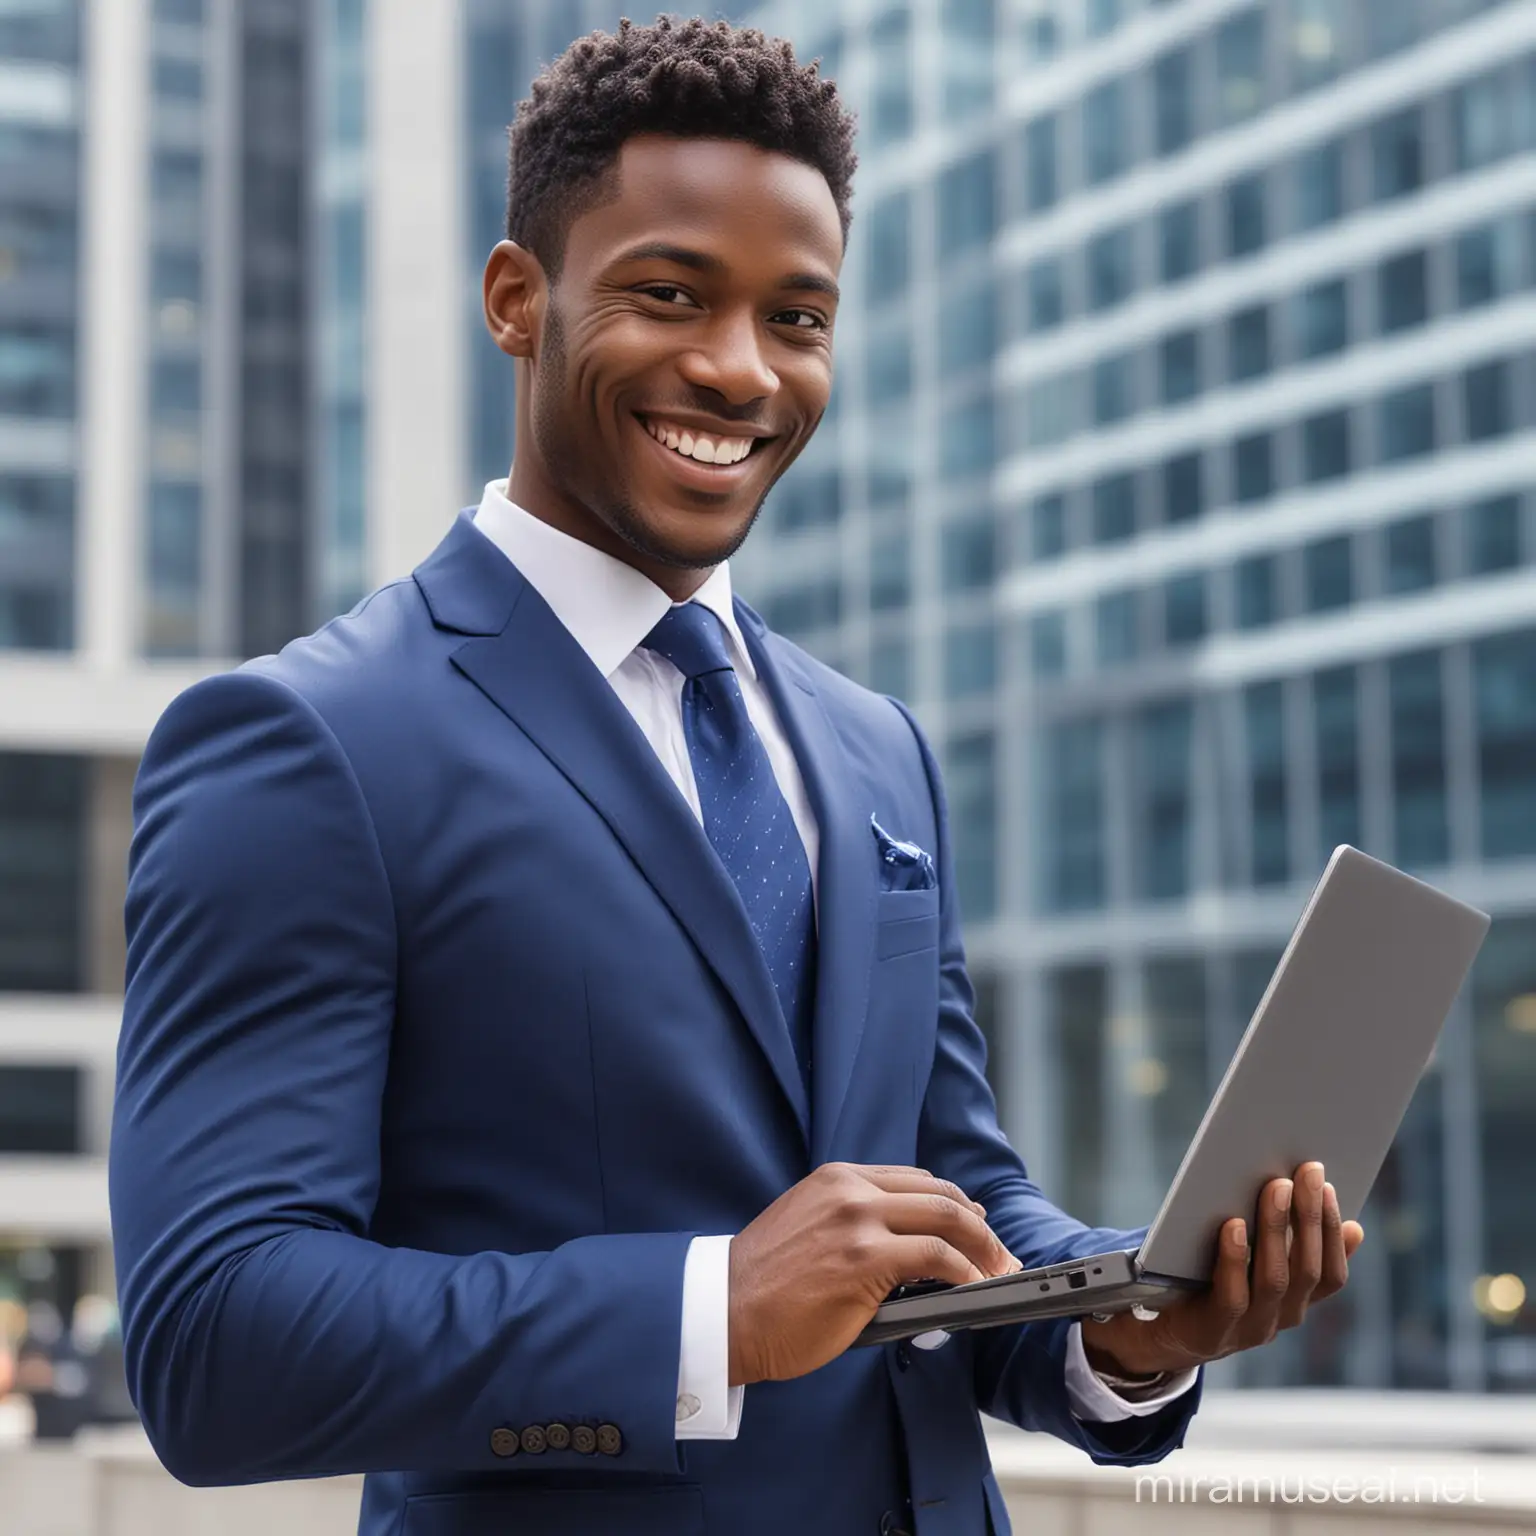 Professional AfricanAmerican Man in Royal Blue Suit with Laptop